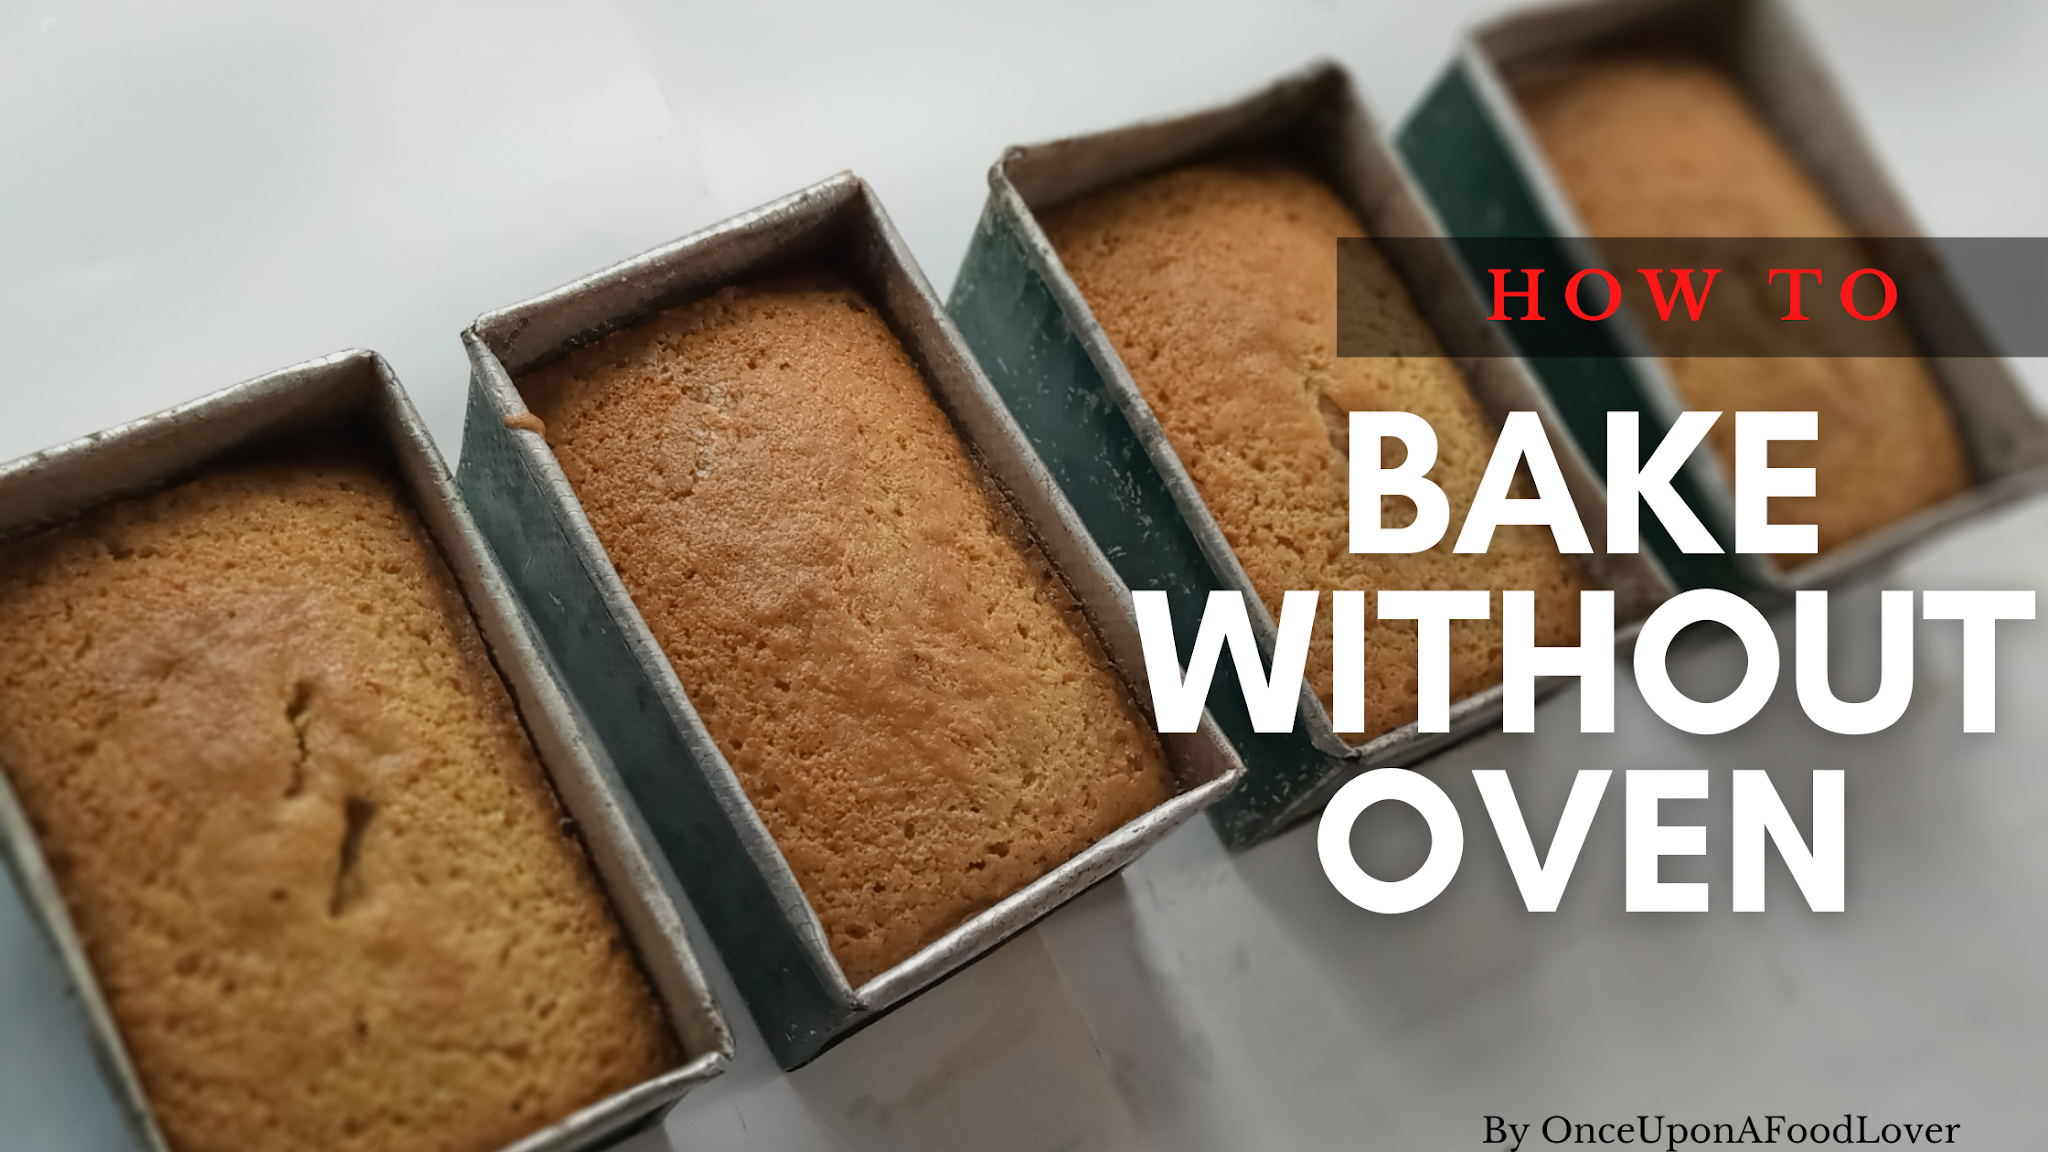 How to Bake without Oven